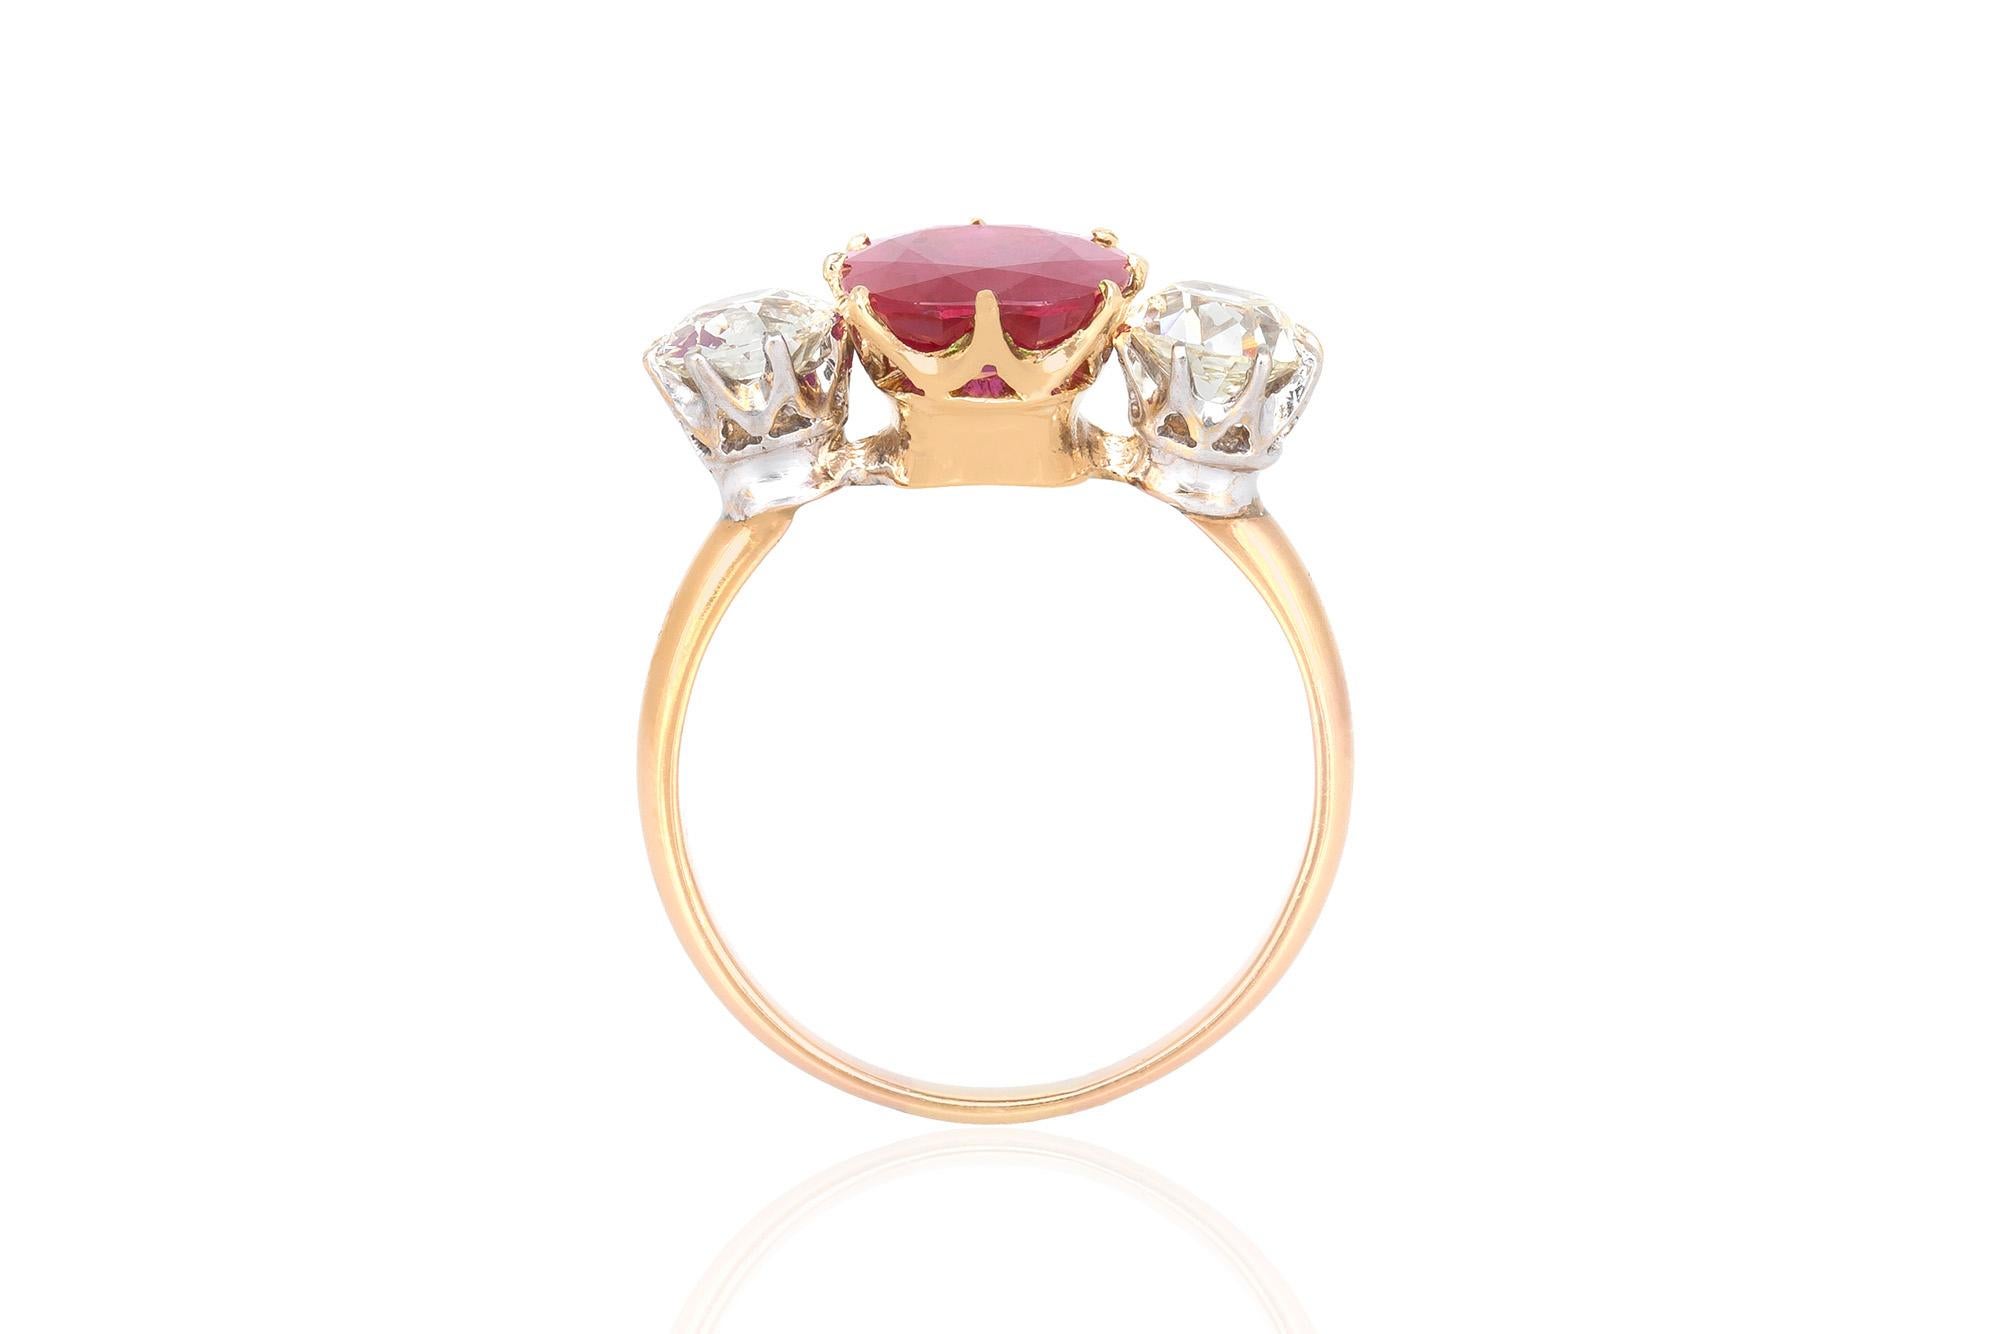 Estate ring finely crafted in 18K yellow gold features an oval shaped 3.00 carat Burma Ruby. The center stone is flanked by two round brilliant cut diamonds, weighing a total of 2.25 carat. Circa 1950's.